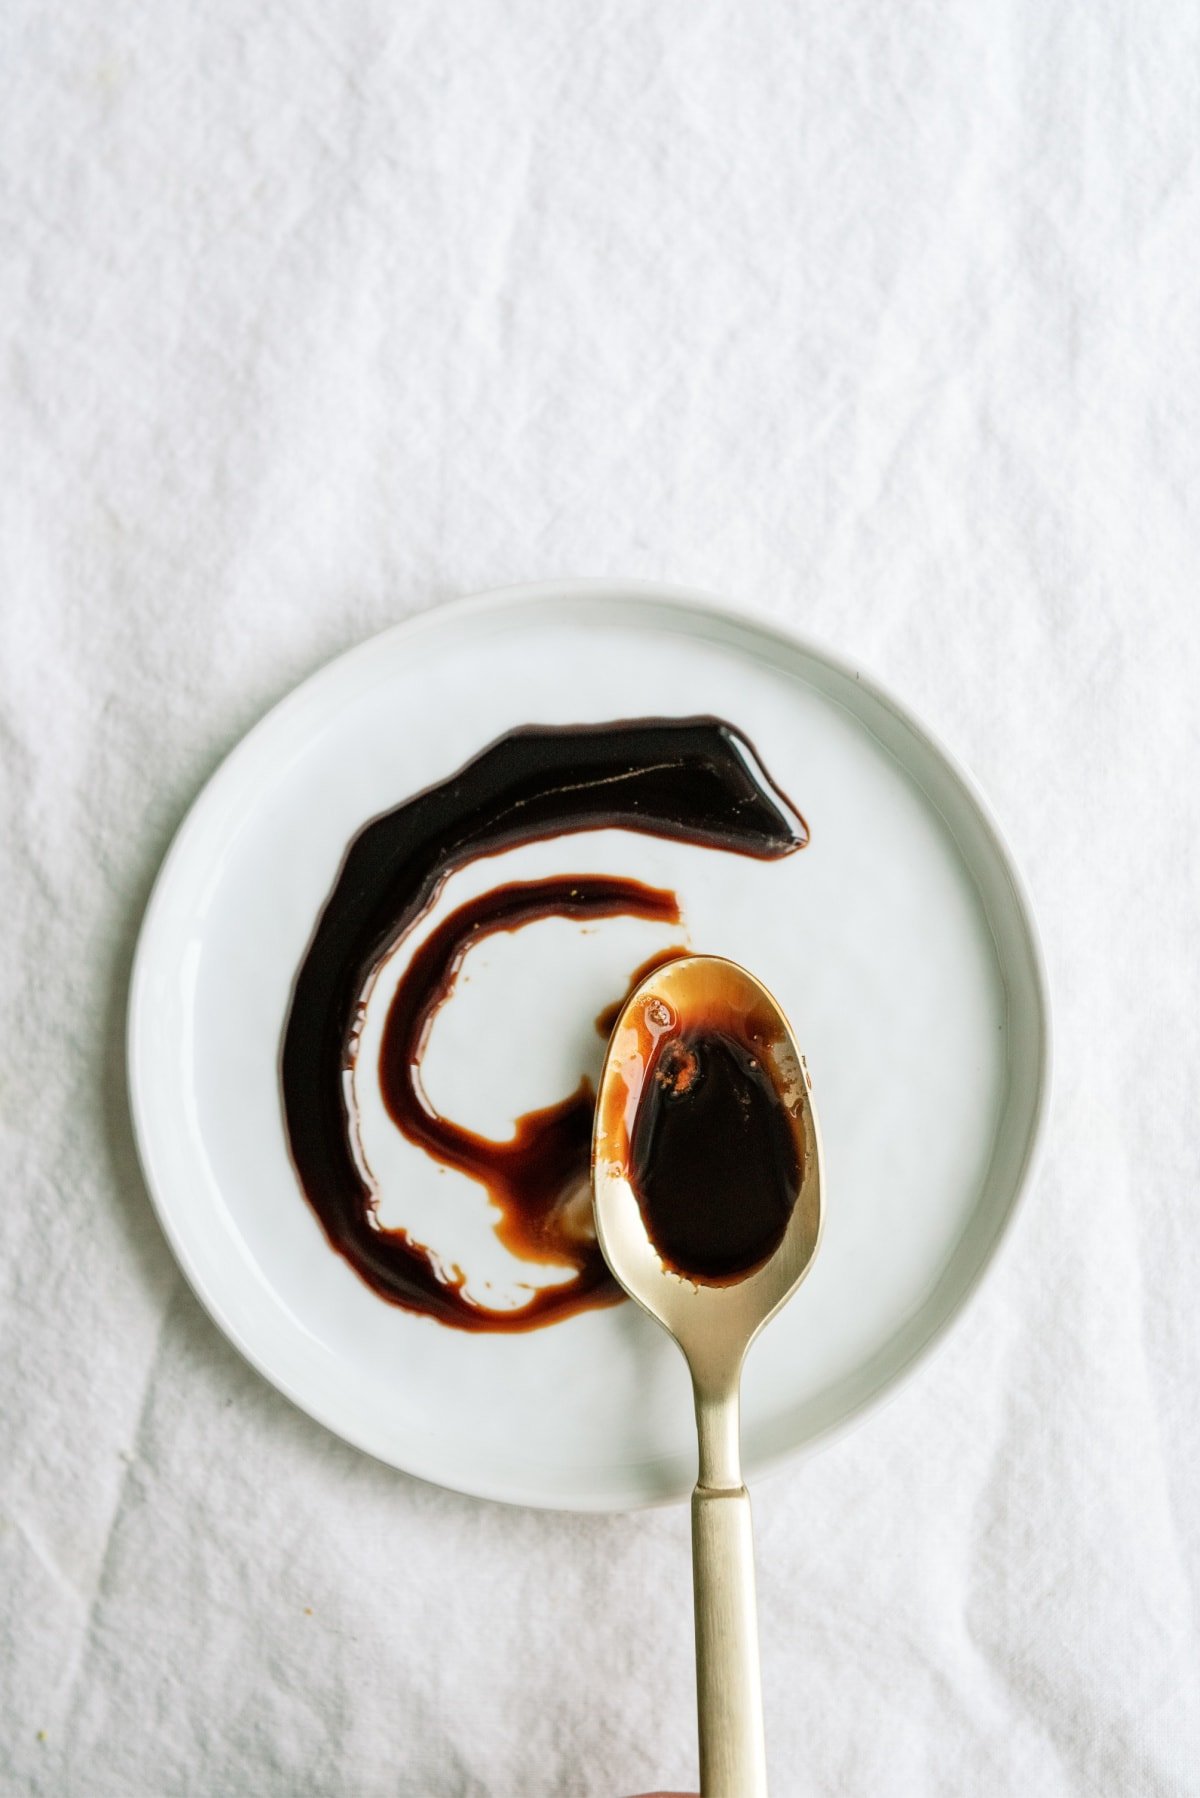 balsamic reduction swirled on plate with spoon